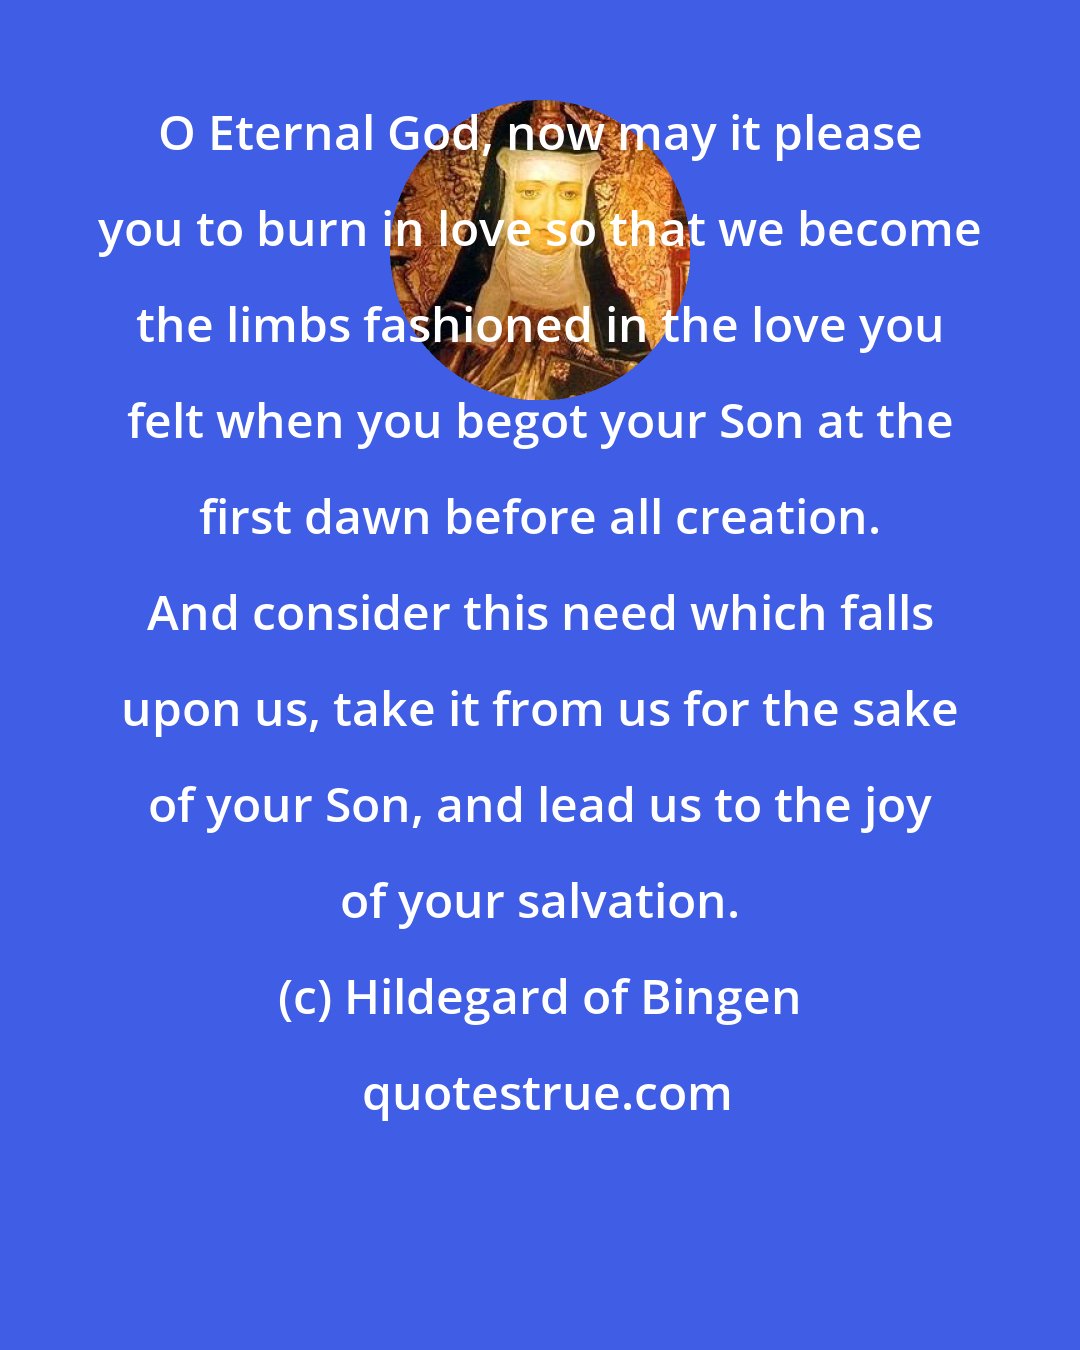 Hildegard of Bingen: O Eternal God, now may it please you to burn in love so that we become the limbs fashioned in the love you felt when you begot your Son at the first dawn before all creation. And consider this need which falls upon us, take it from us for the sake of your Son, and lead us to the joy of your salvation.